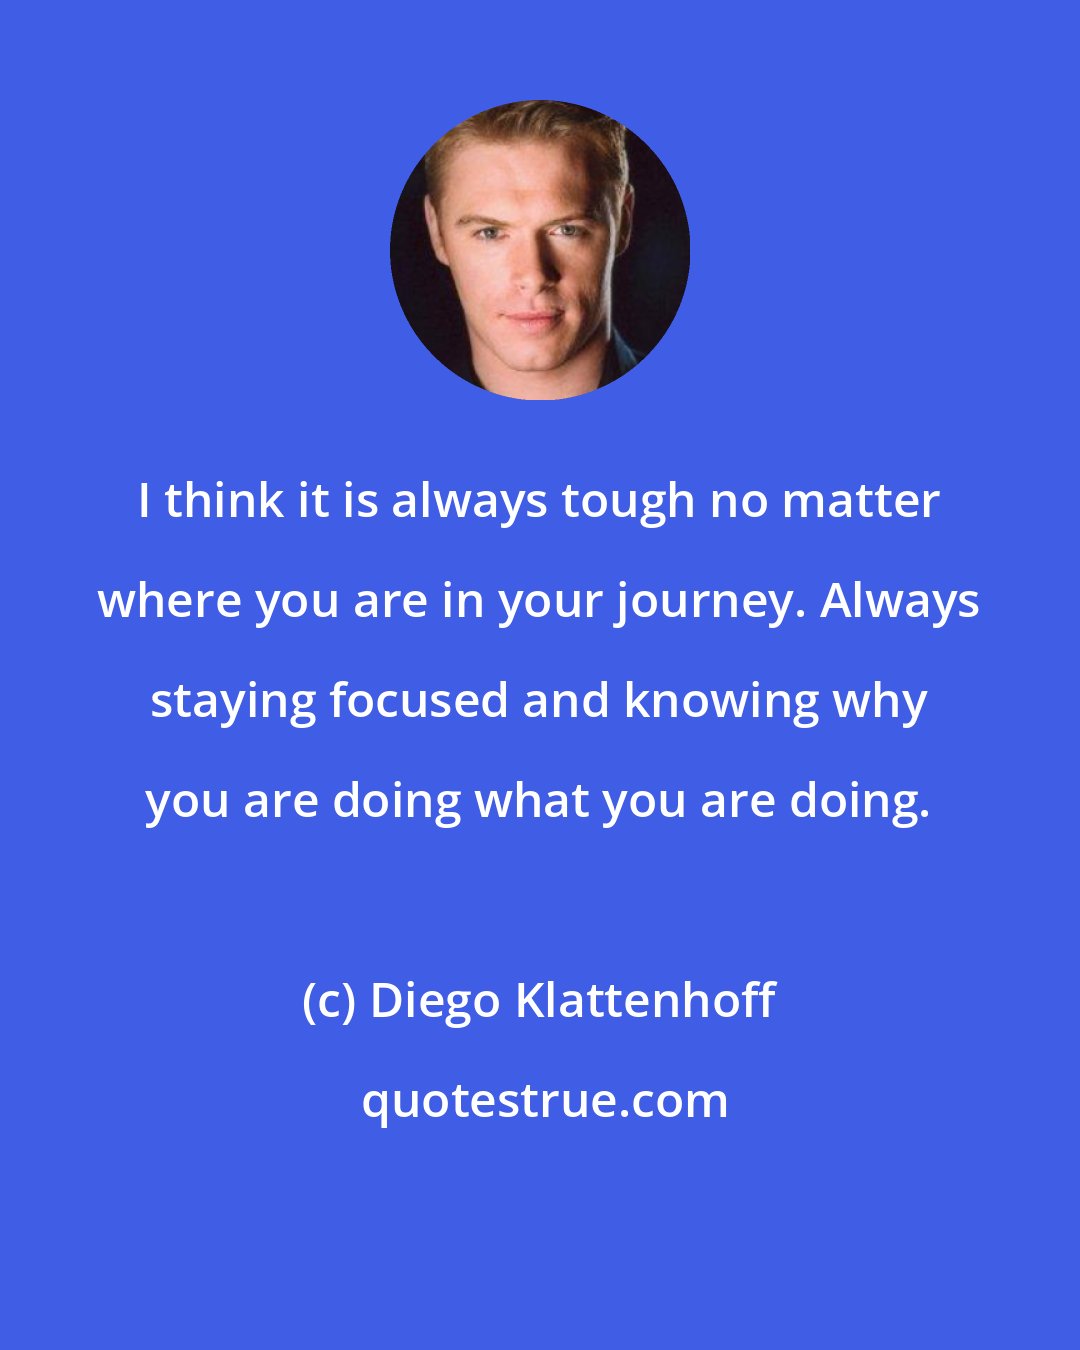 Diego Klattenhoff: I think it is always tough no matter where you are in your journey. Always staying focused and knowing why you are doing what you are doing.